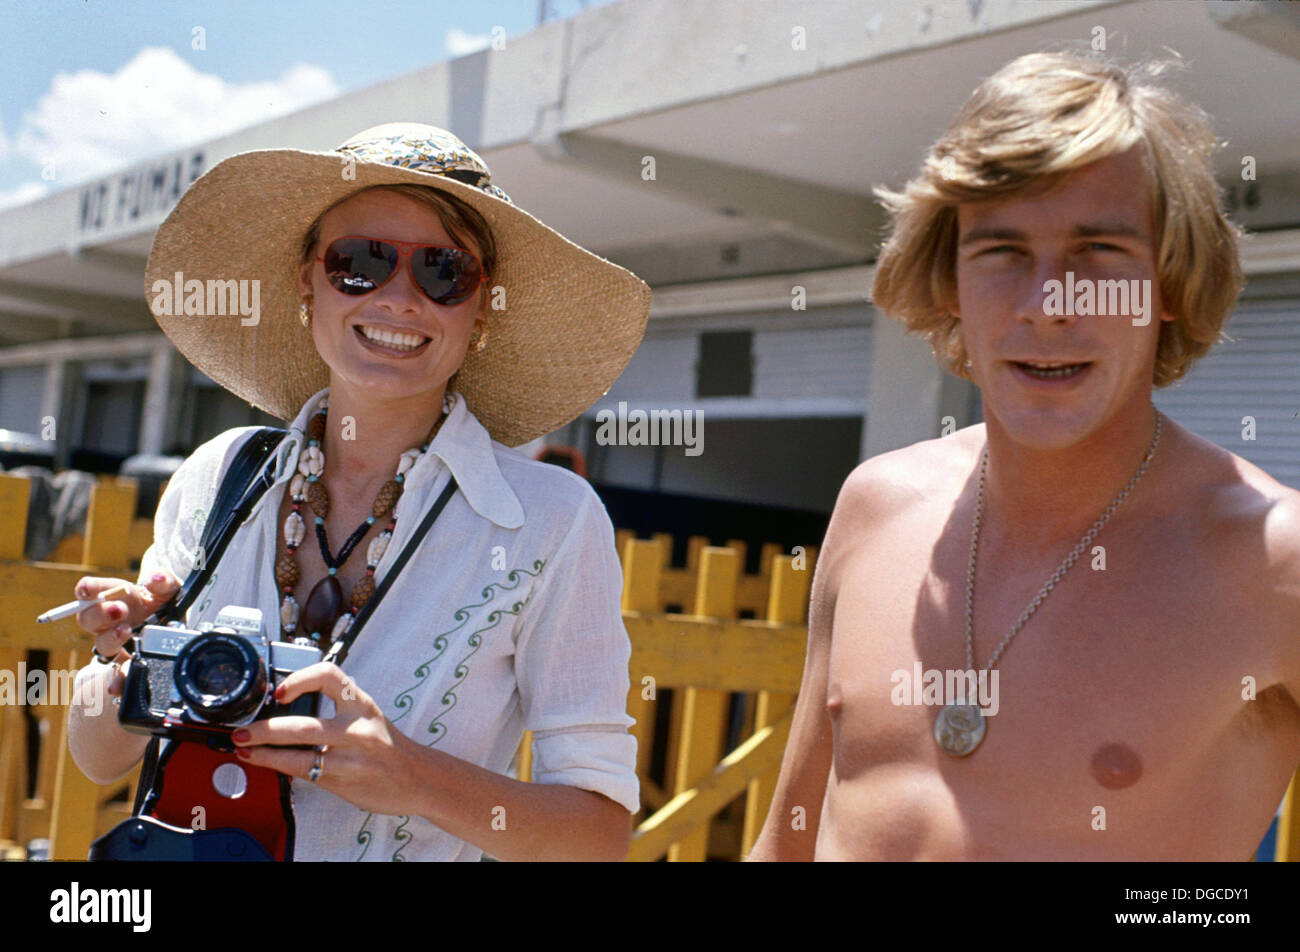 James Hunt, British racing driver who won the Formula 1 World Championship in 1976. Photographed with his wife Suzy in 1975. Stock Photo